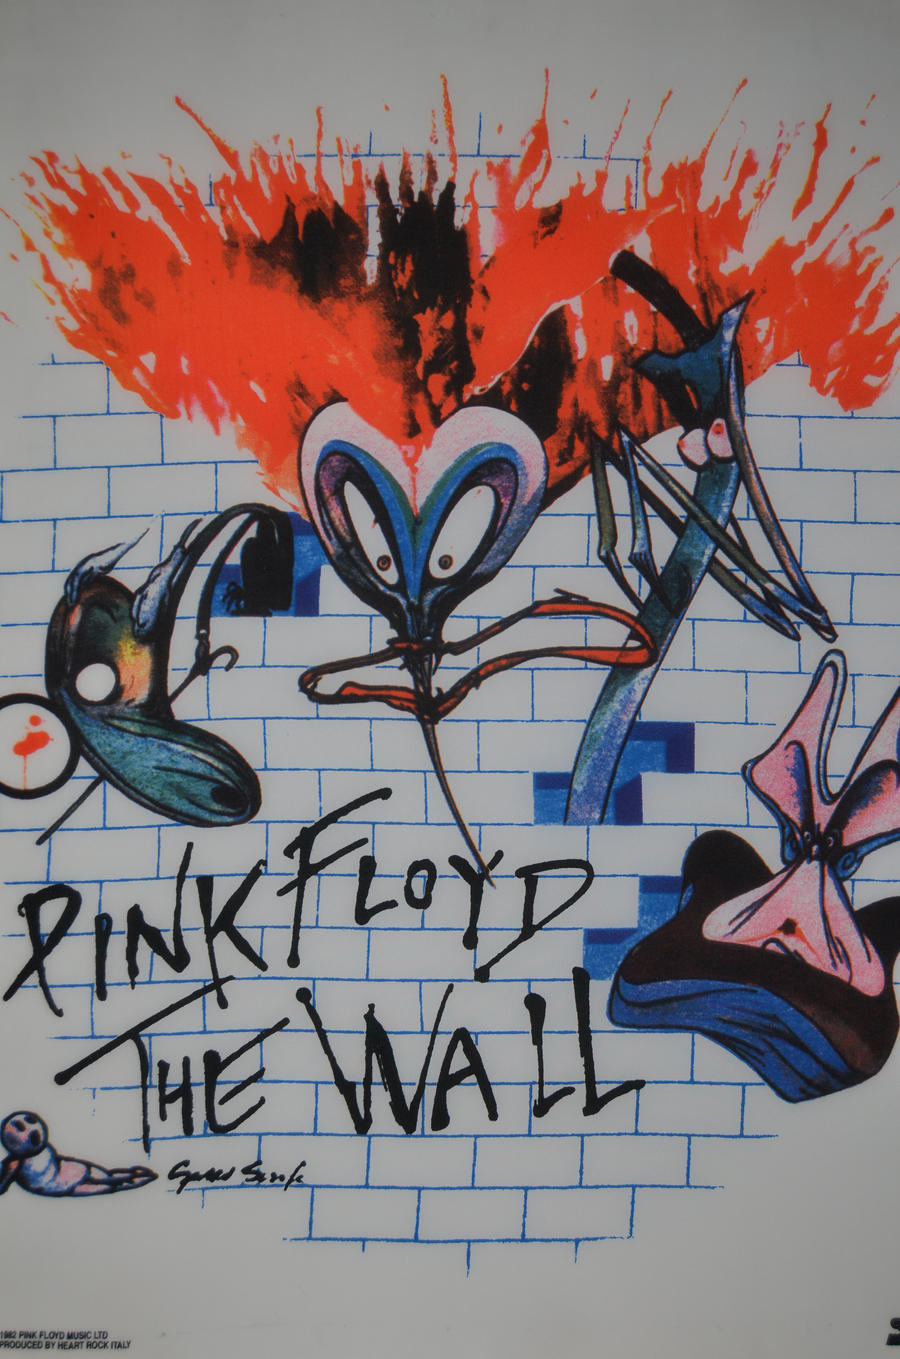 Pink floyd the wall by Dinkok on DeviantArt